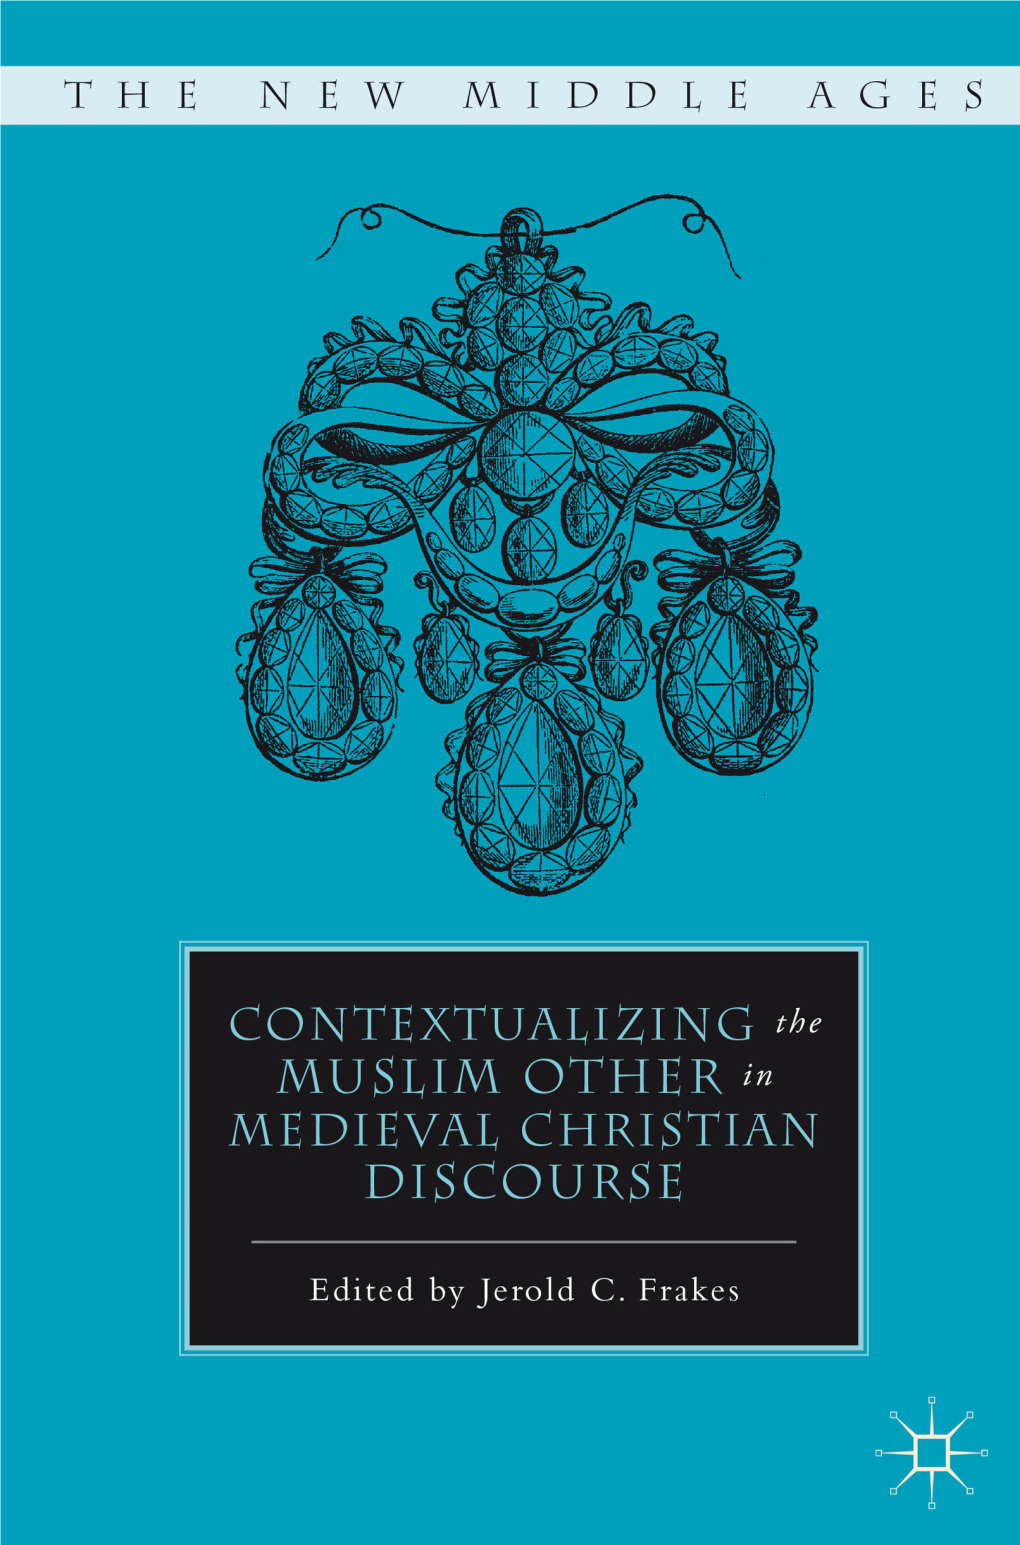 Contextualizing the Muslim Other in Medieval Christian Discourse, Edited by Jerold C